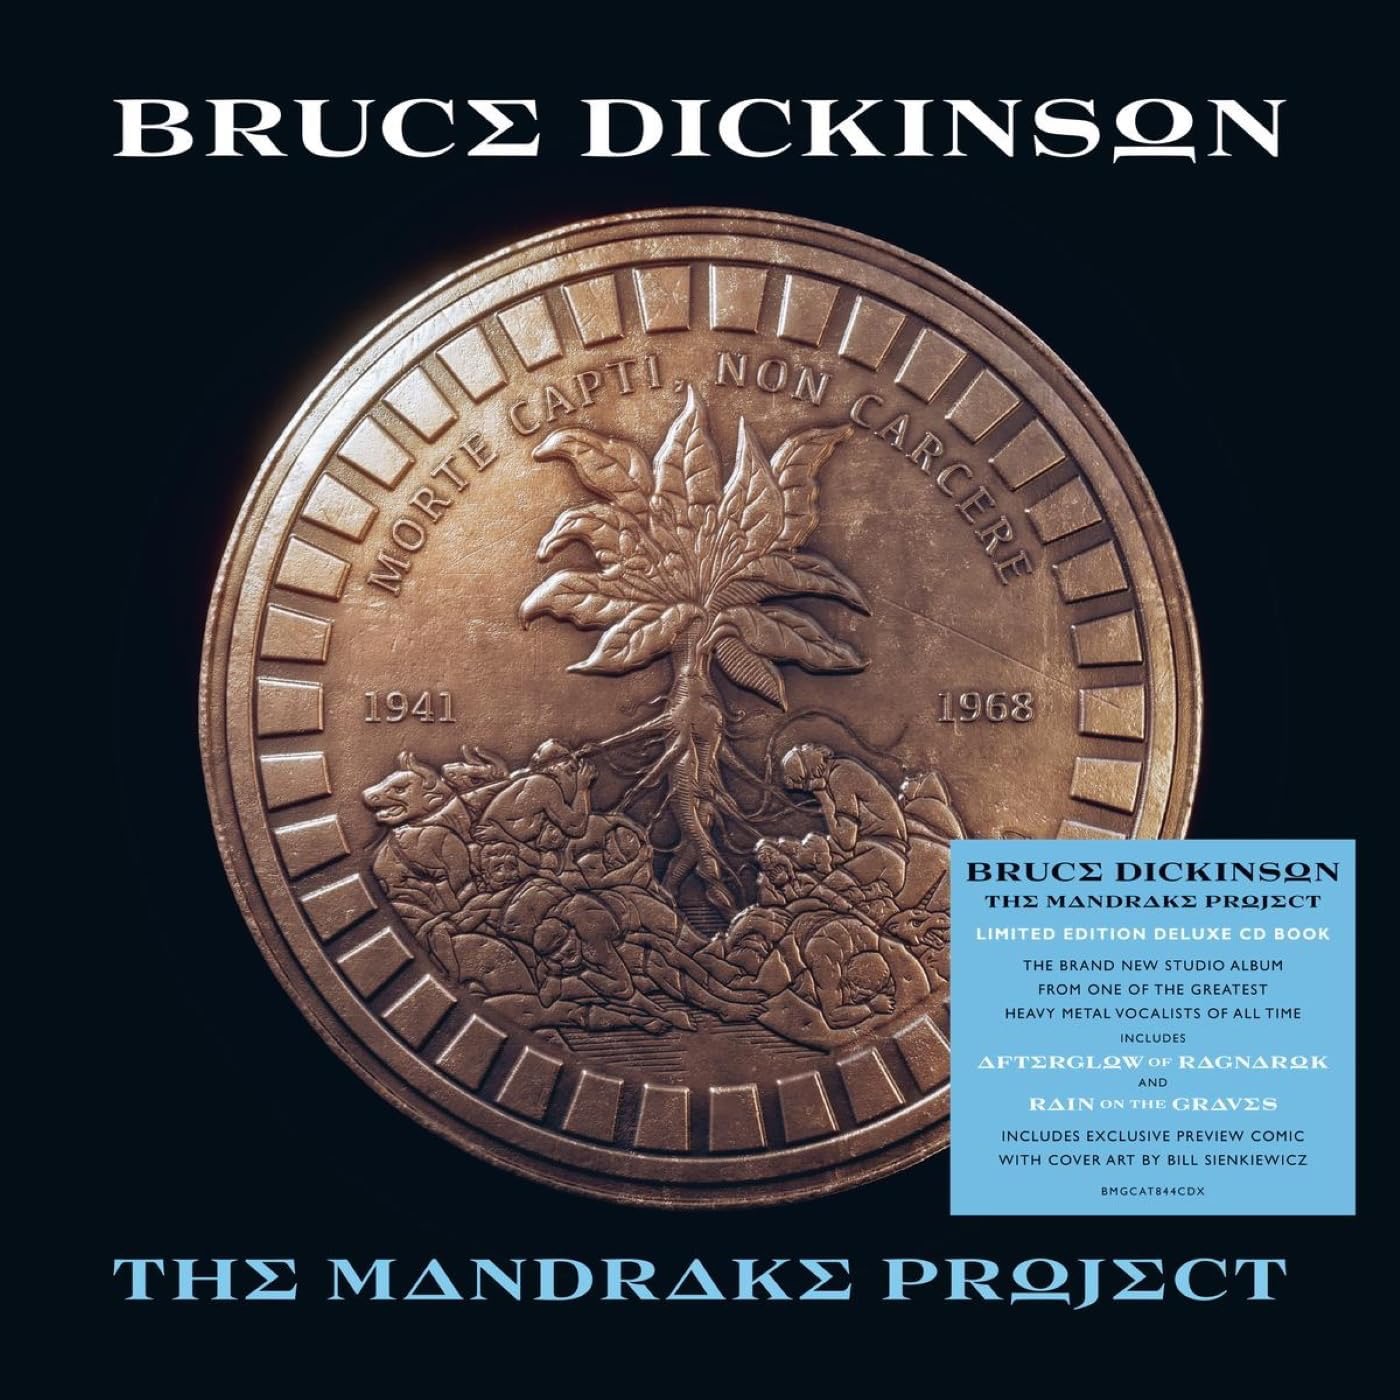 Bruce Dickinson – The Mandrake Project Review